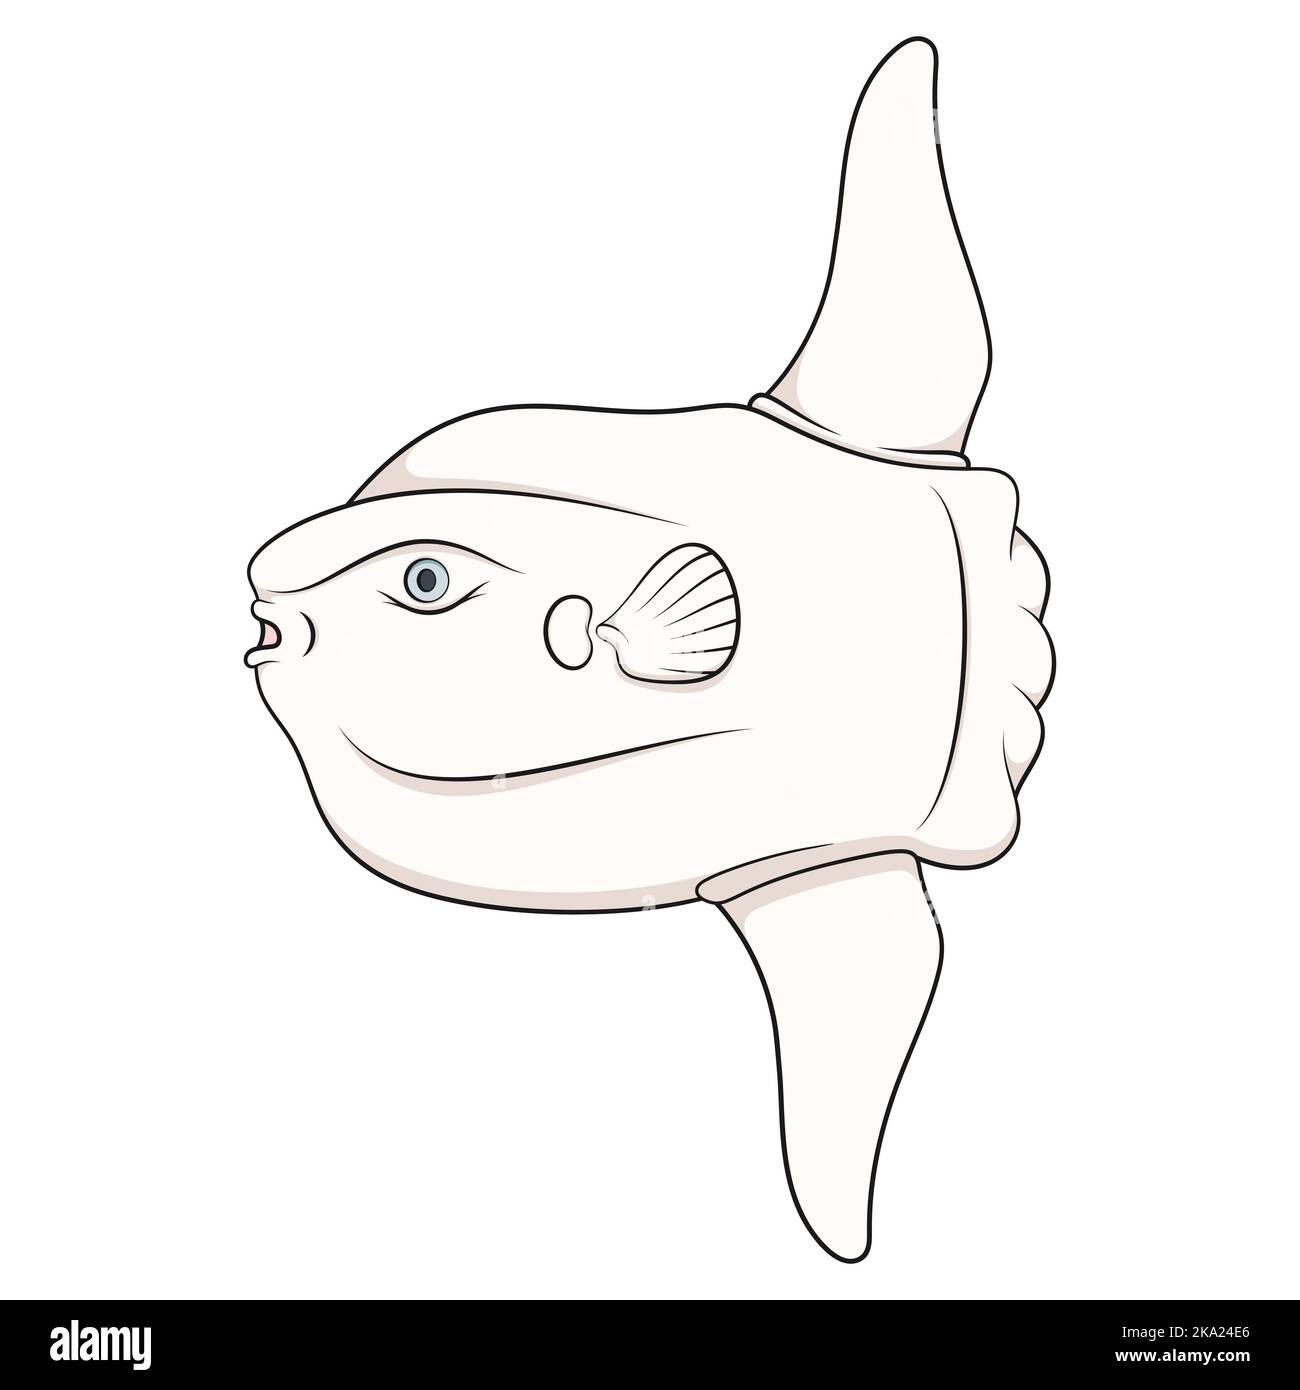 How to Draw a Sunfish